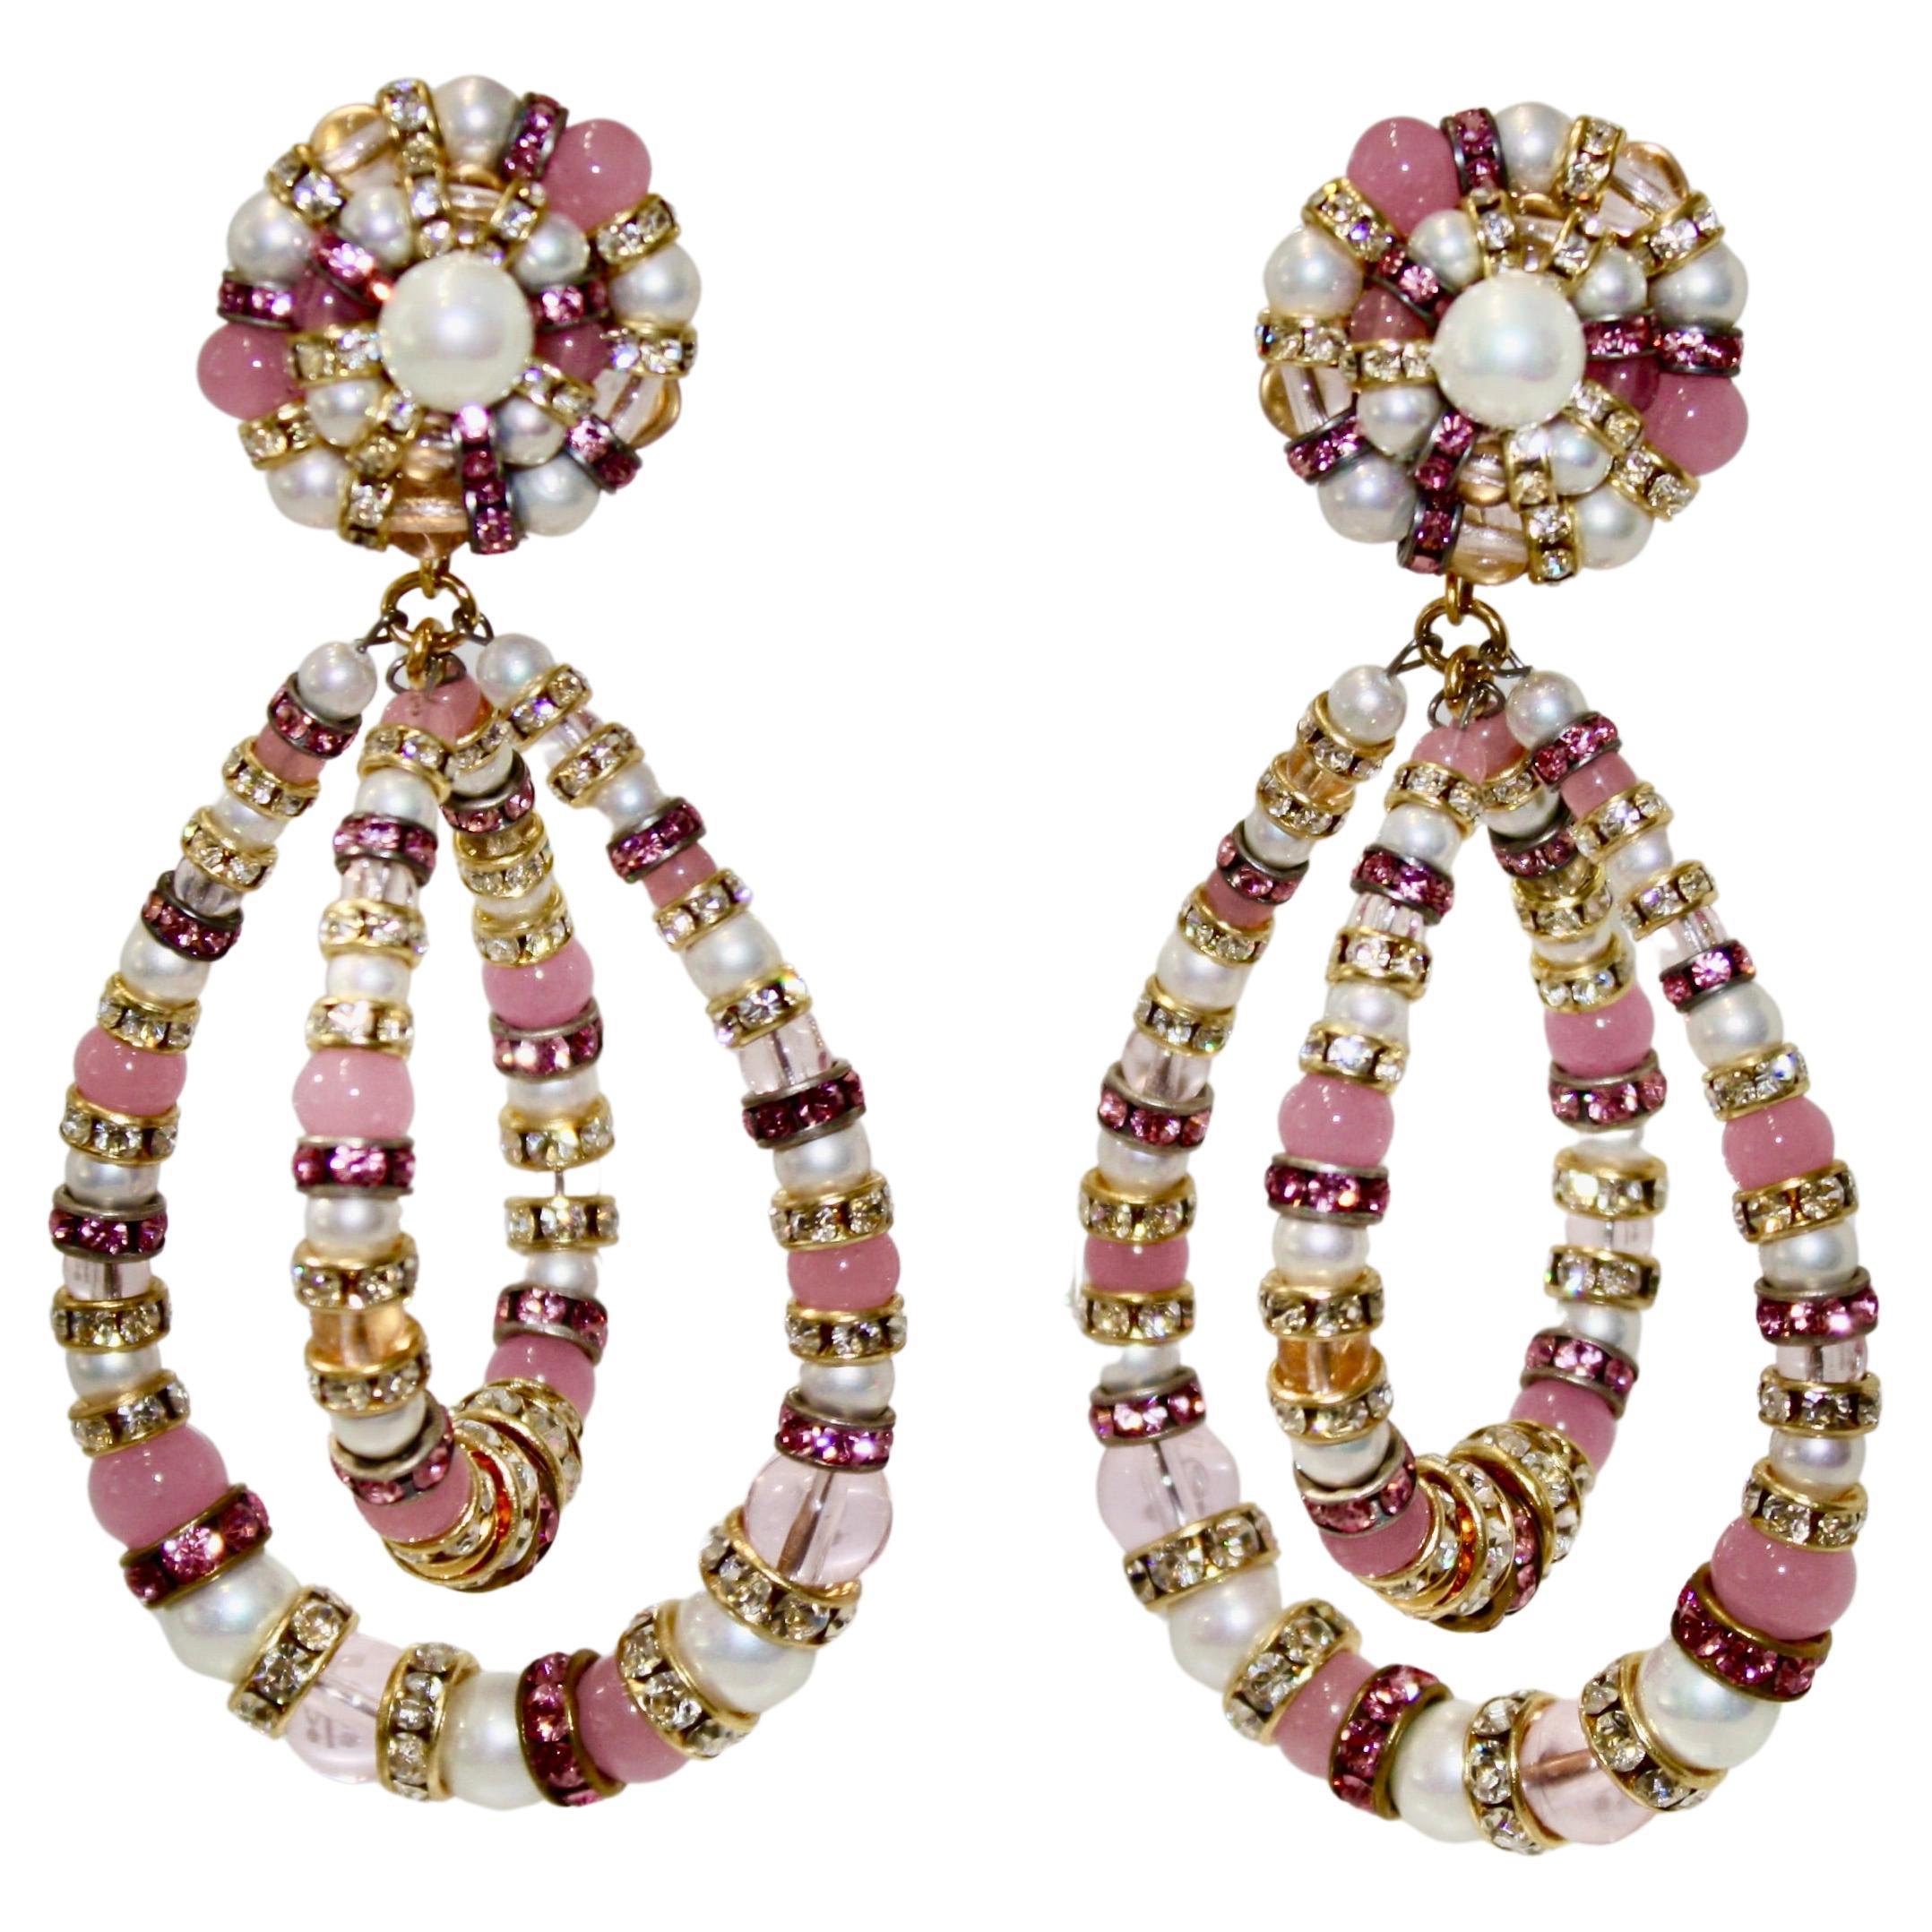 Françoise Montague Large Lolita Clip Earrings in Pink and Pearls